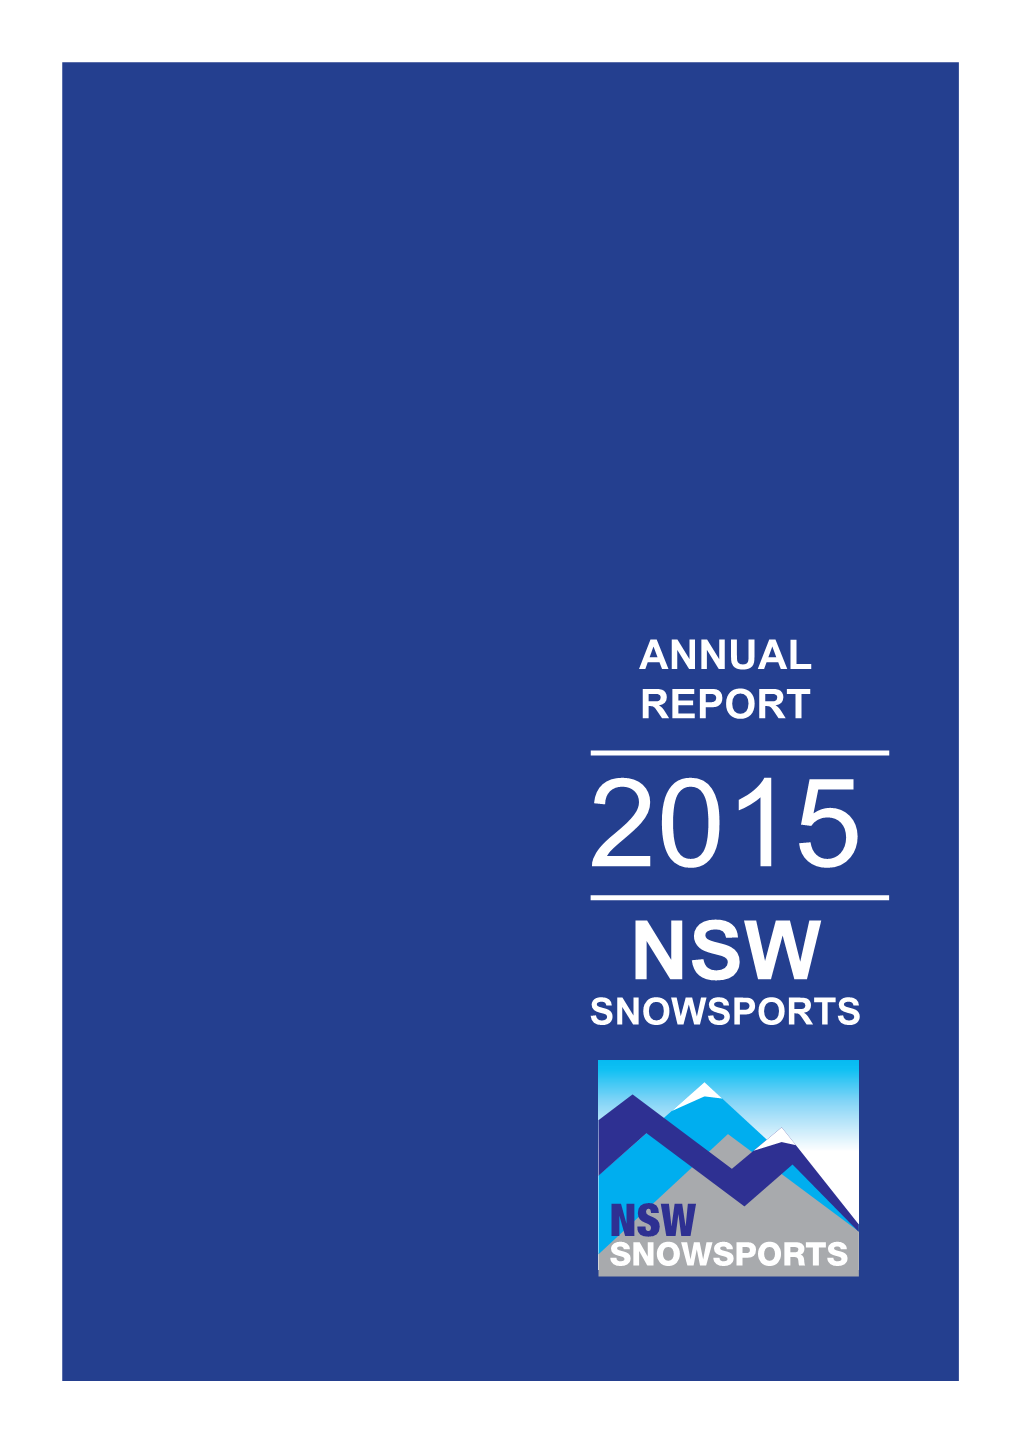 Annual Report 2015 Nsw Snowsports Contents